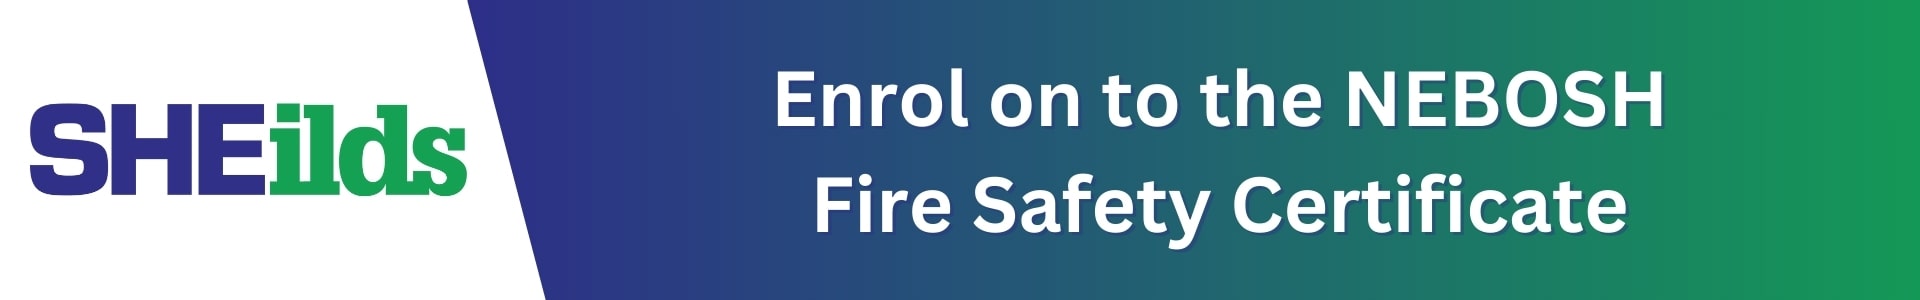 Enrol on the NEBOSH Fire Safety Certificate